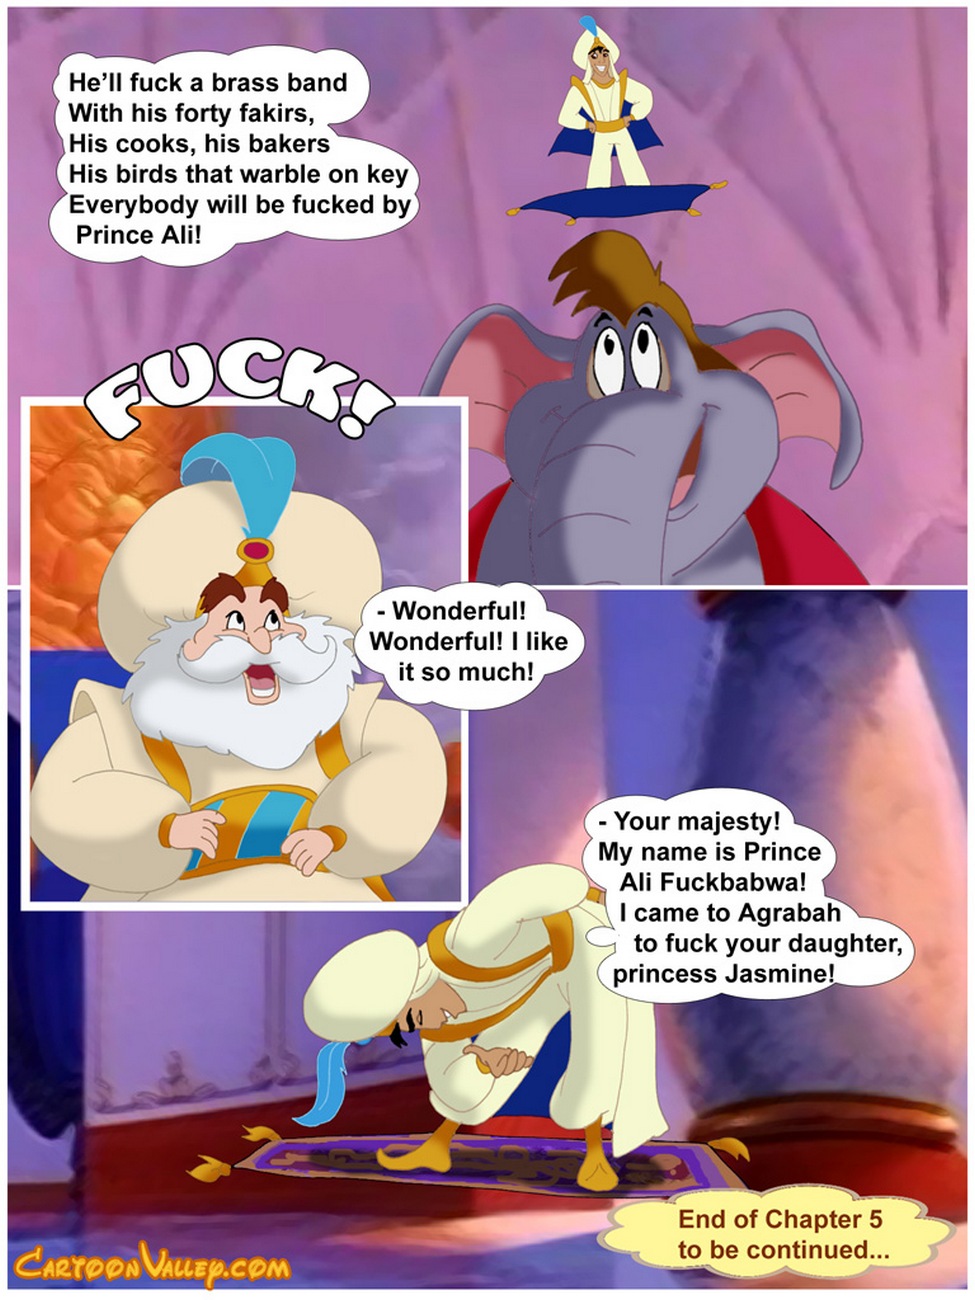 Aladdin - The Fucker From Agrabah - part 4